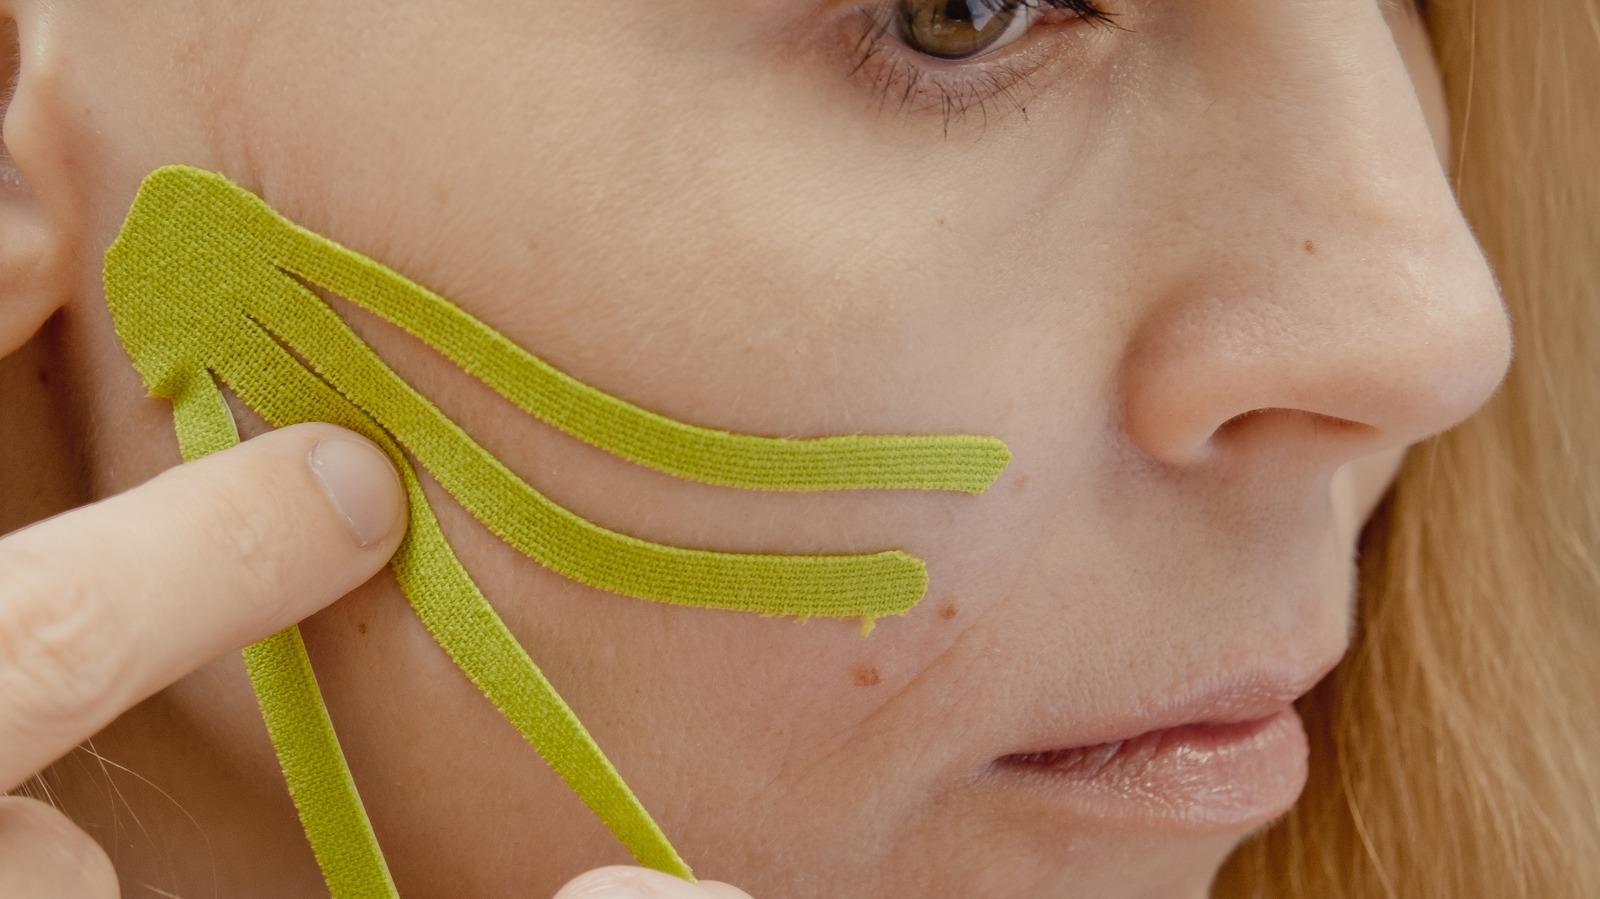 Debunking the Face-Taping Trend: Experts Weigh In on Its Effectiveness for Wrinkle Reduction